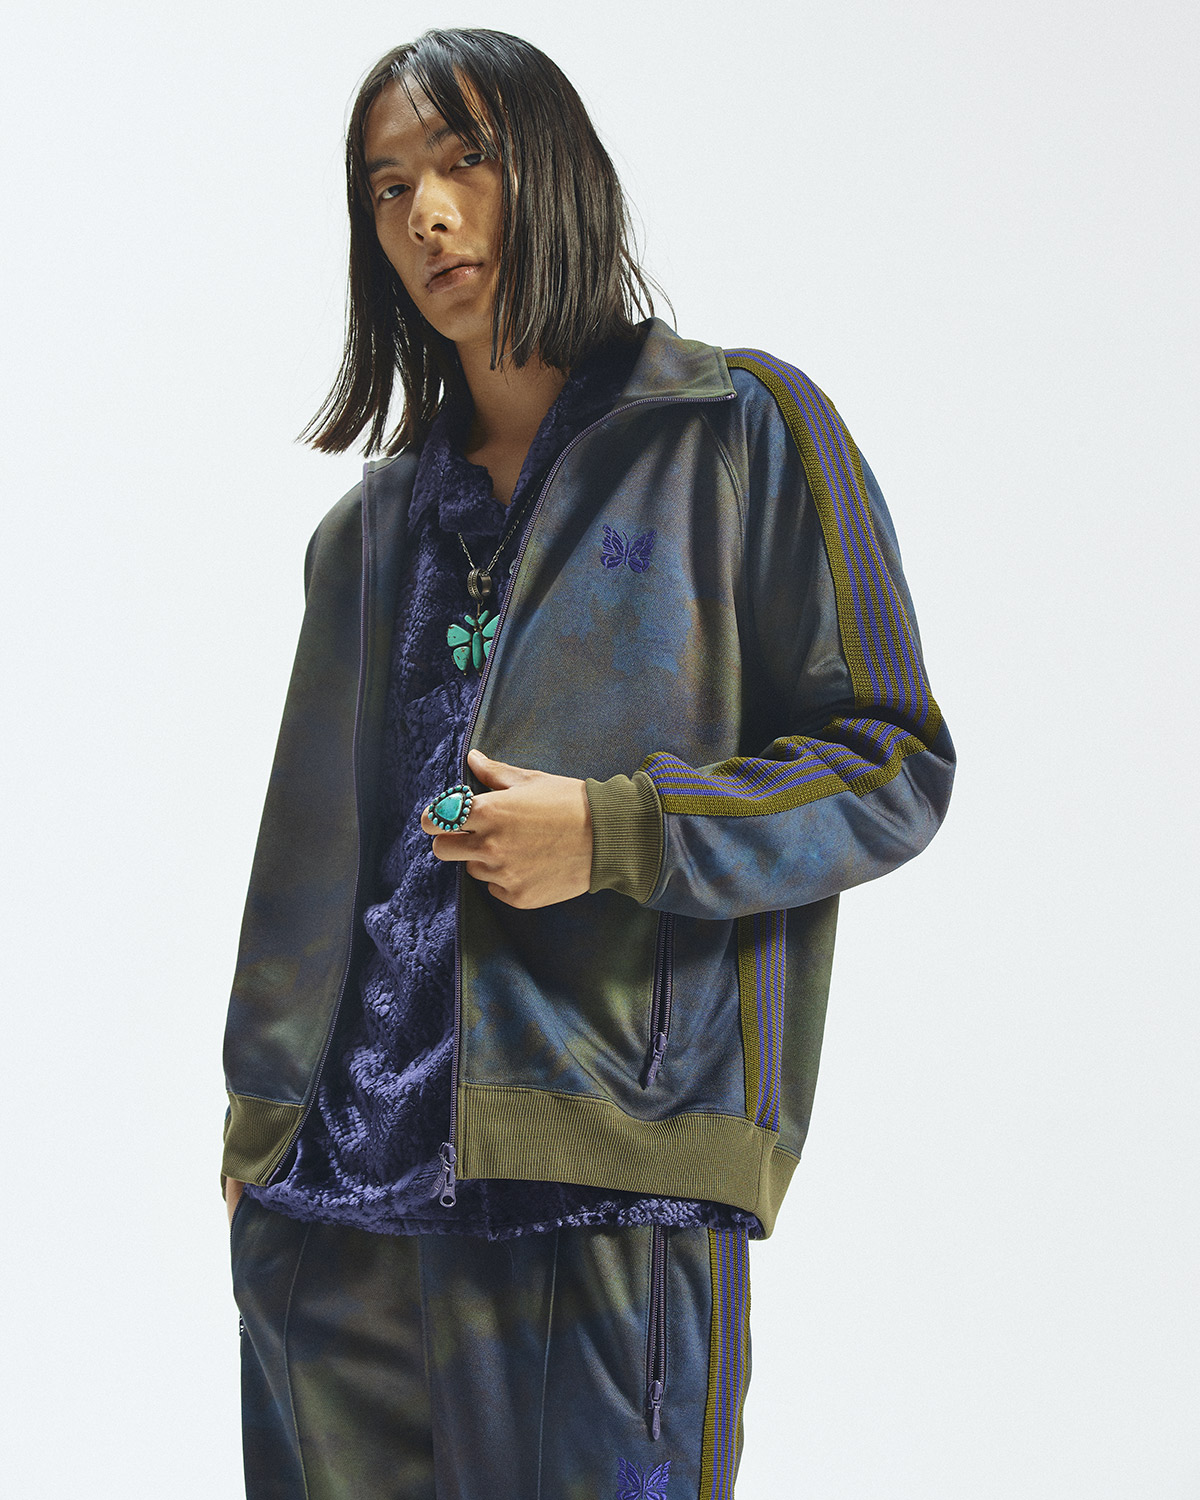 〈NEEDLES〉TRACK SUITS
PRINTED UNEVEN DYE for NEPENTHES